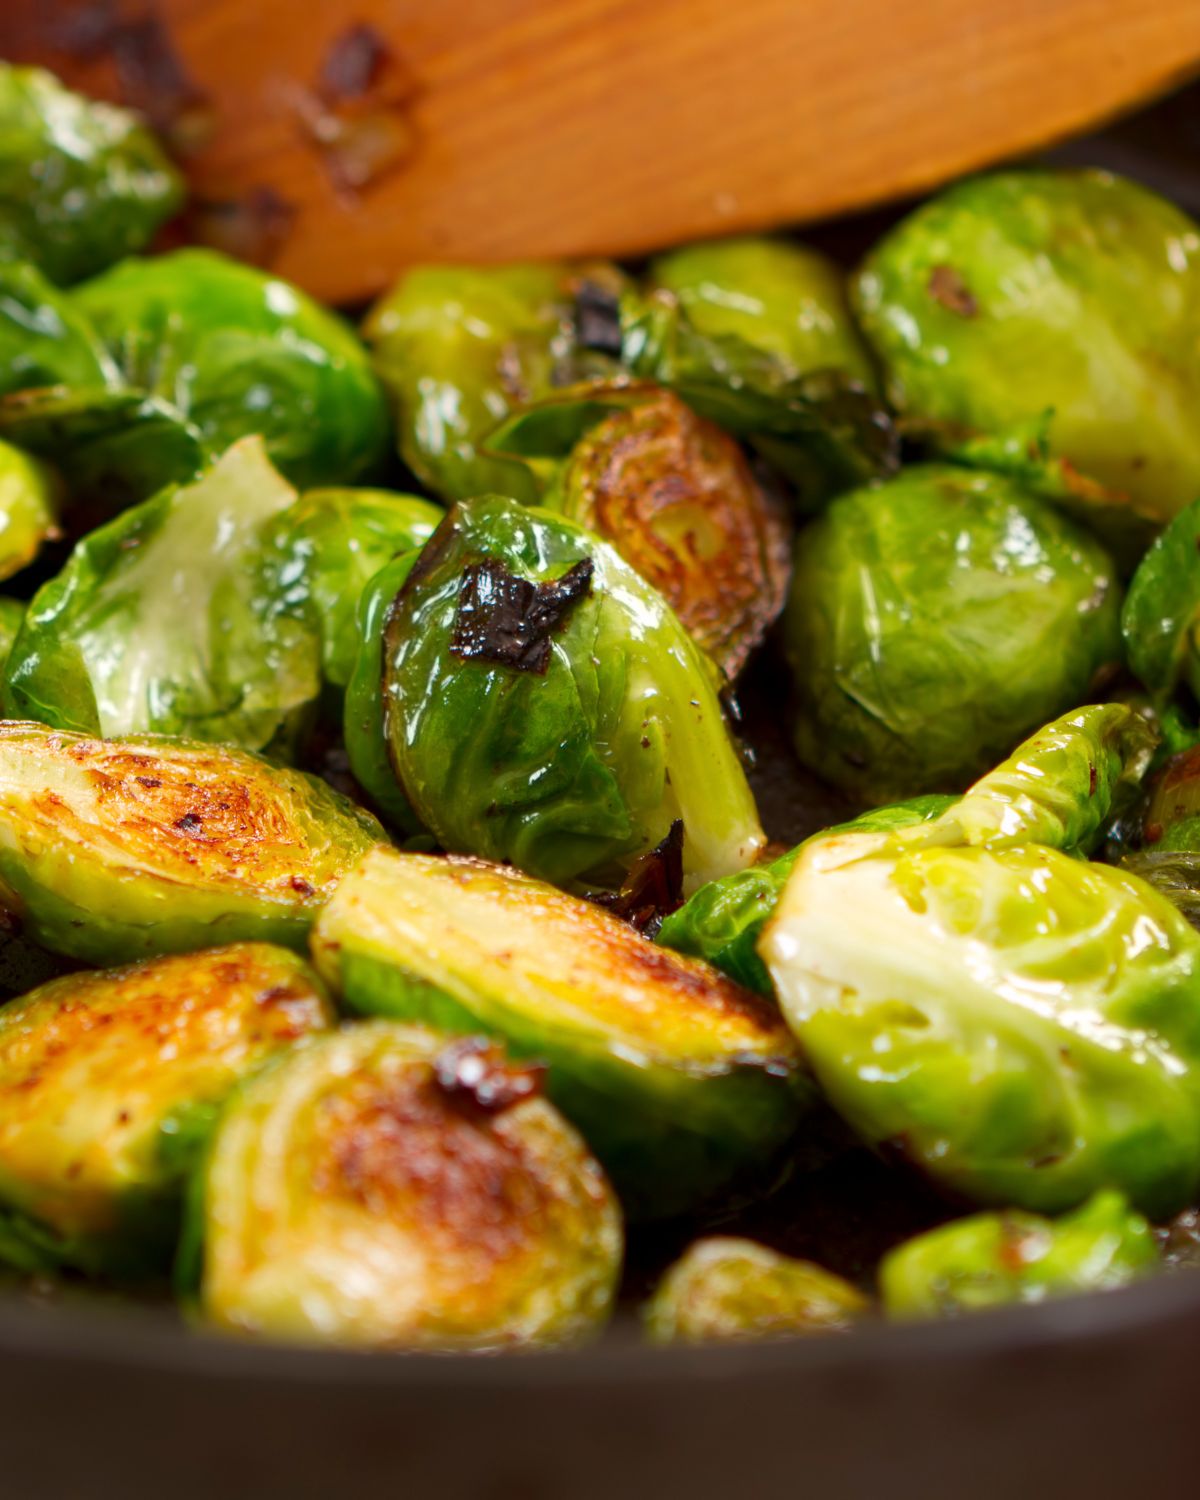 Cooked halved brussels sprouts.